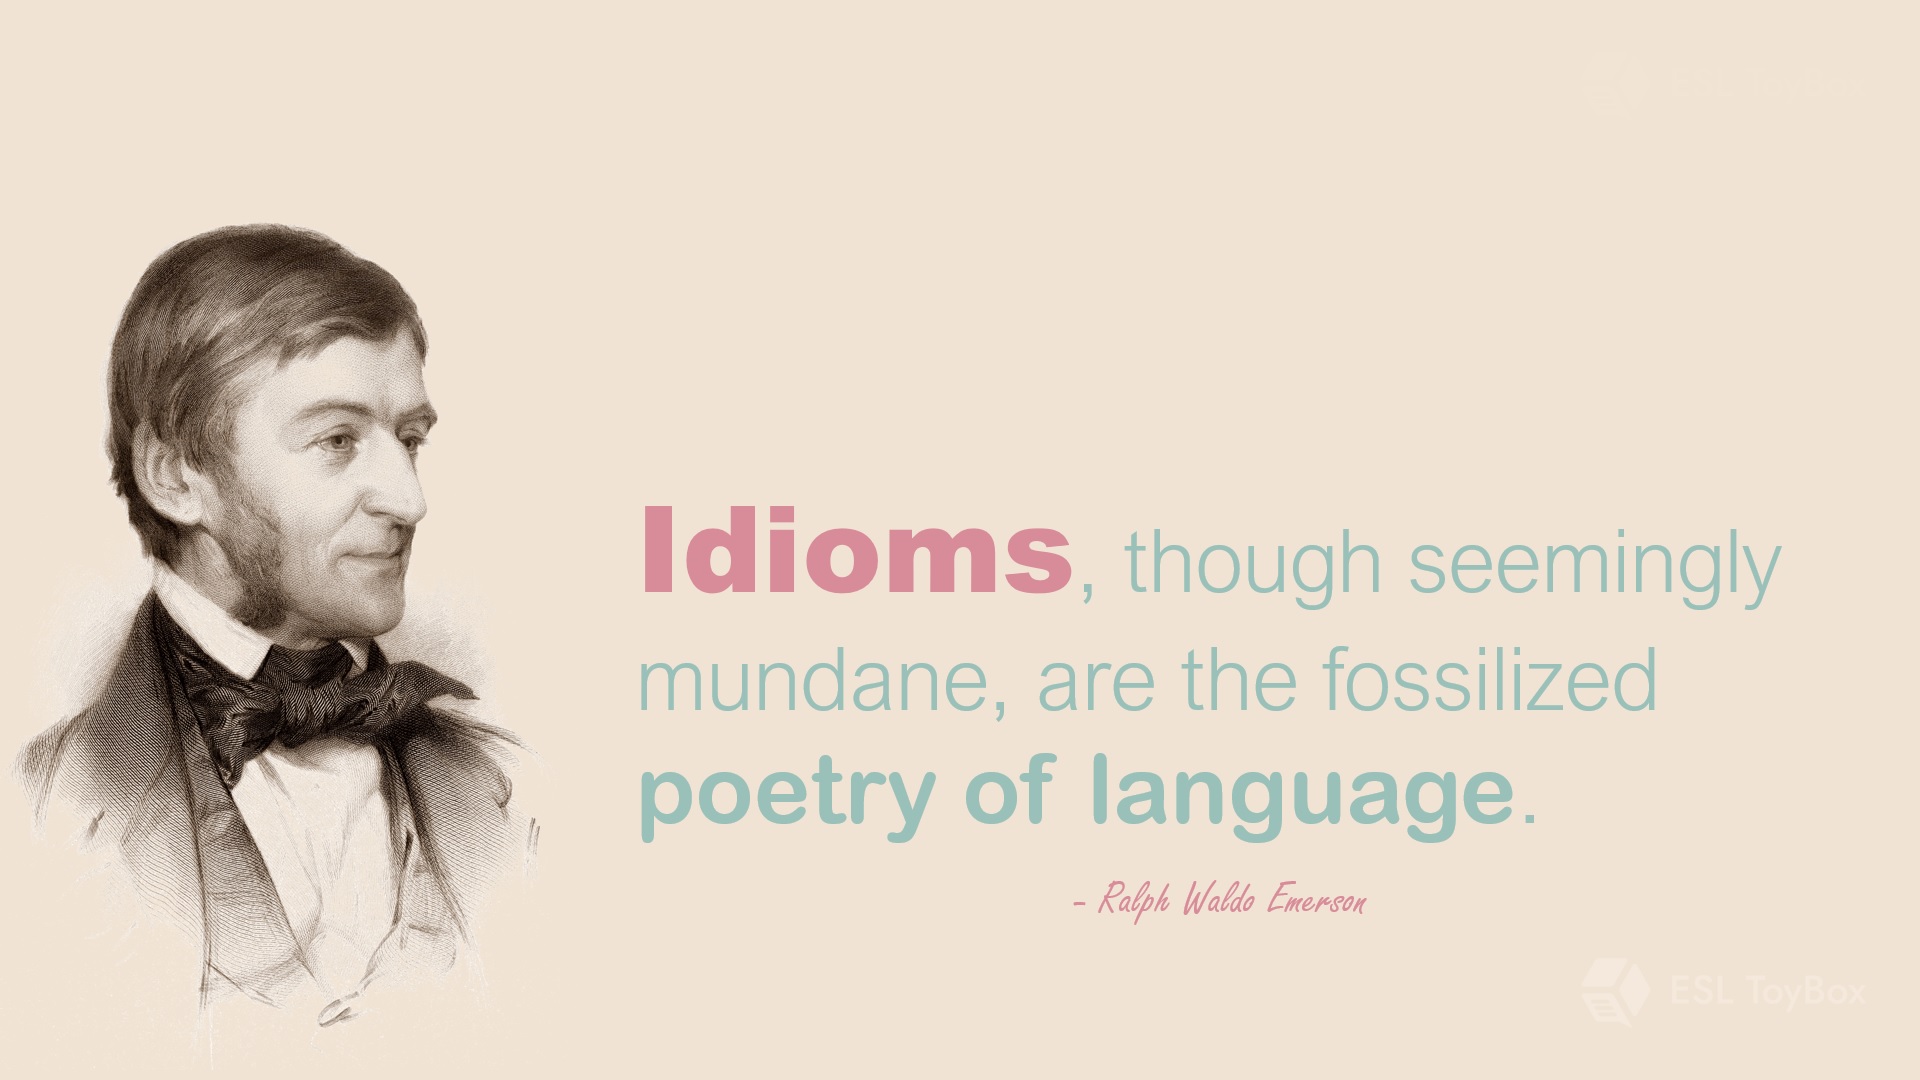 Idioms, though seemingly mundane, are the fossilized poetry of language.